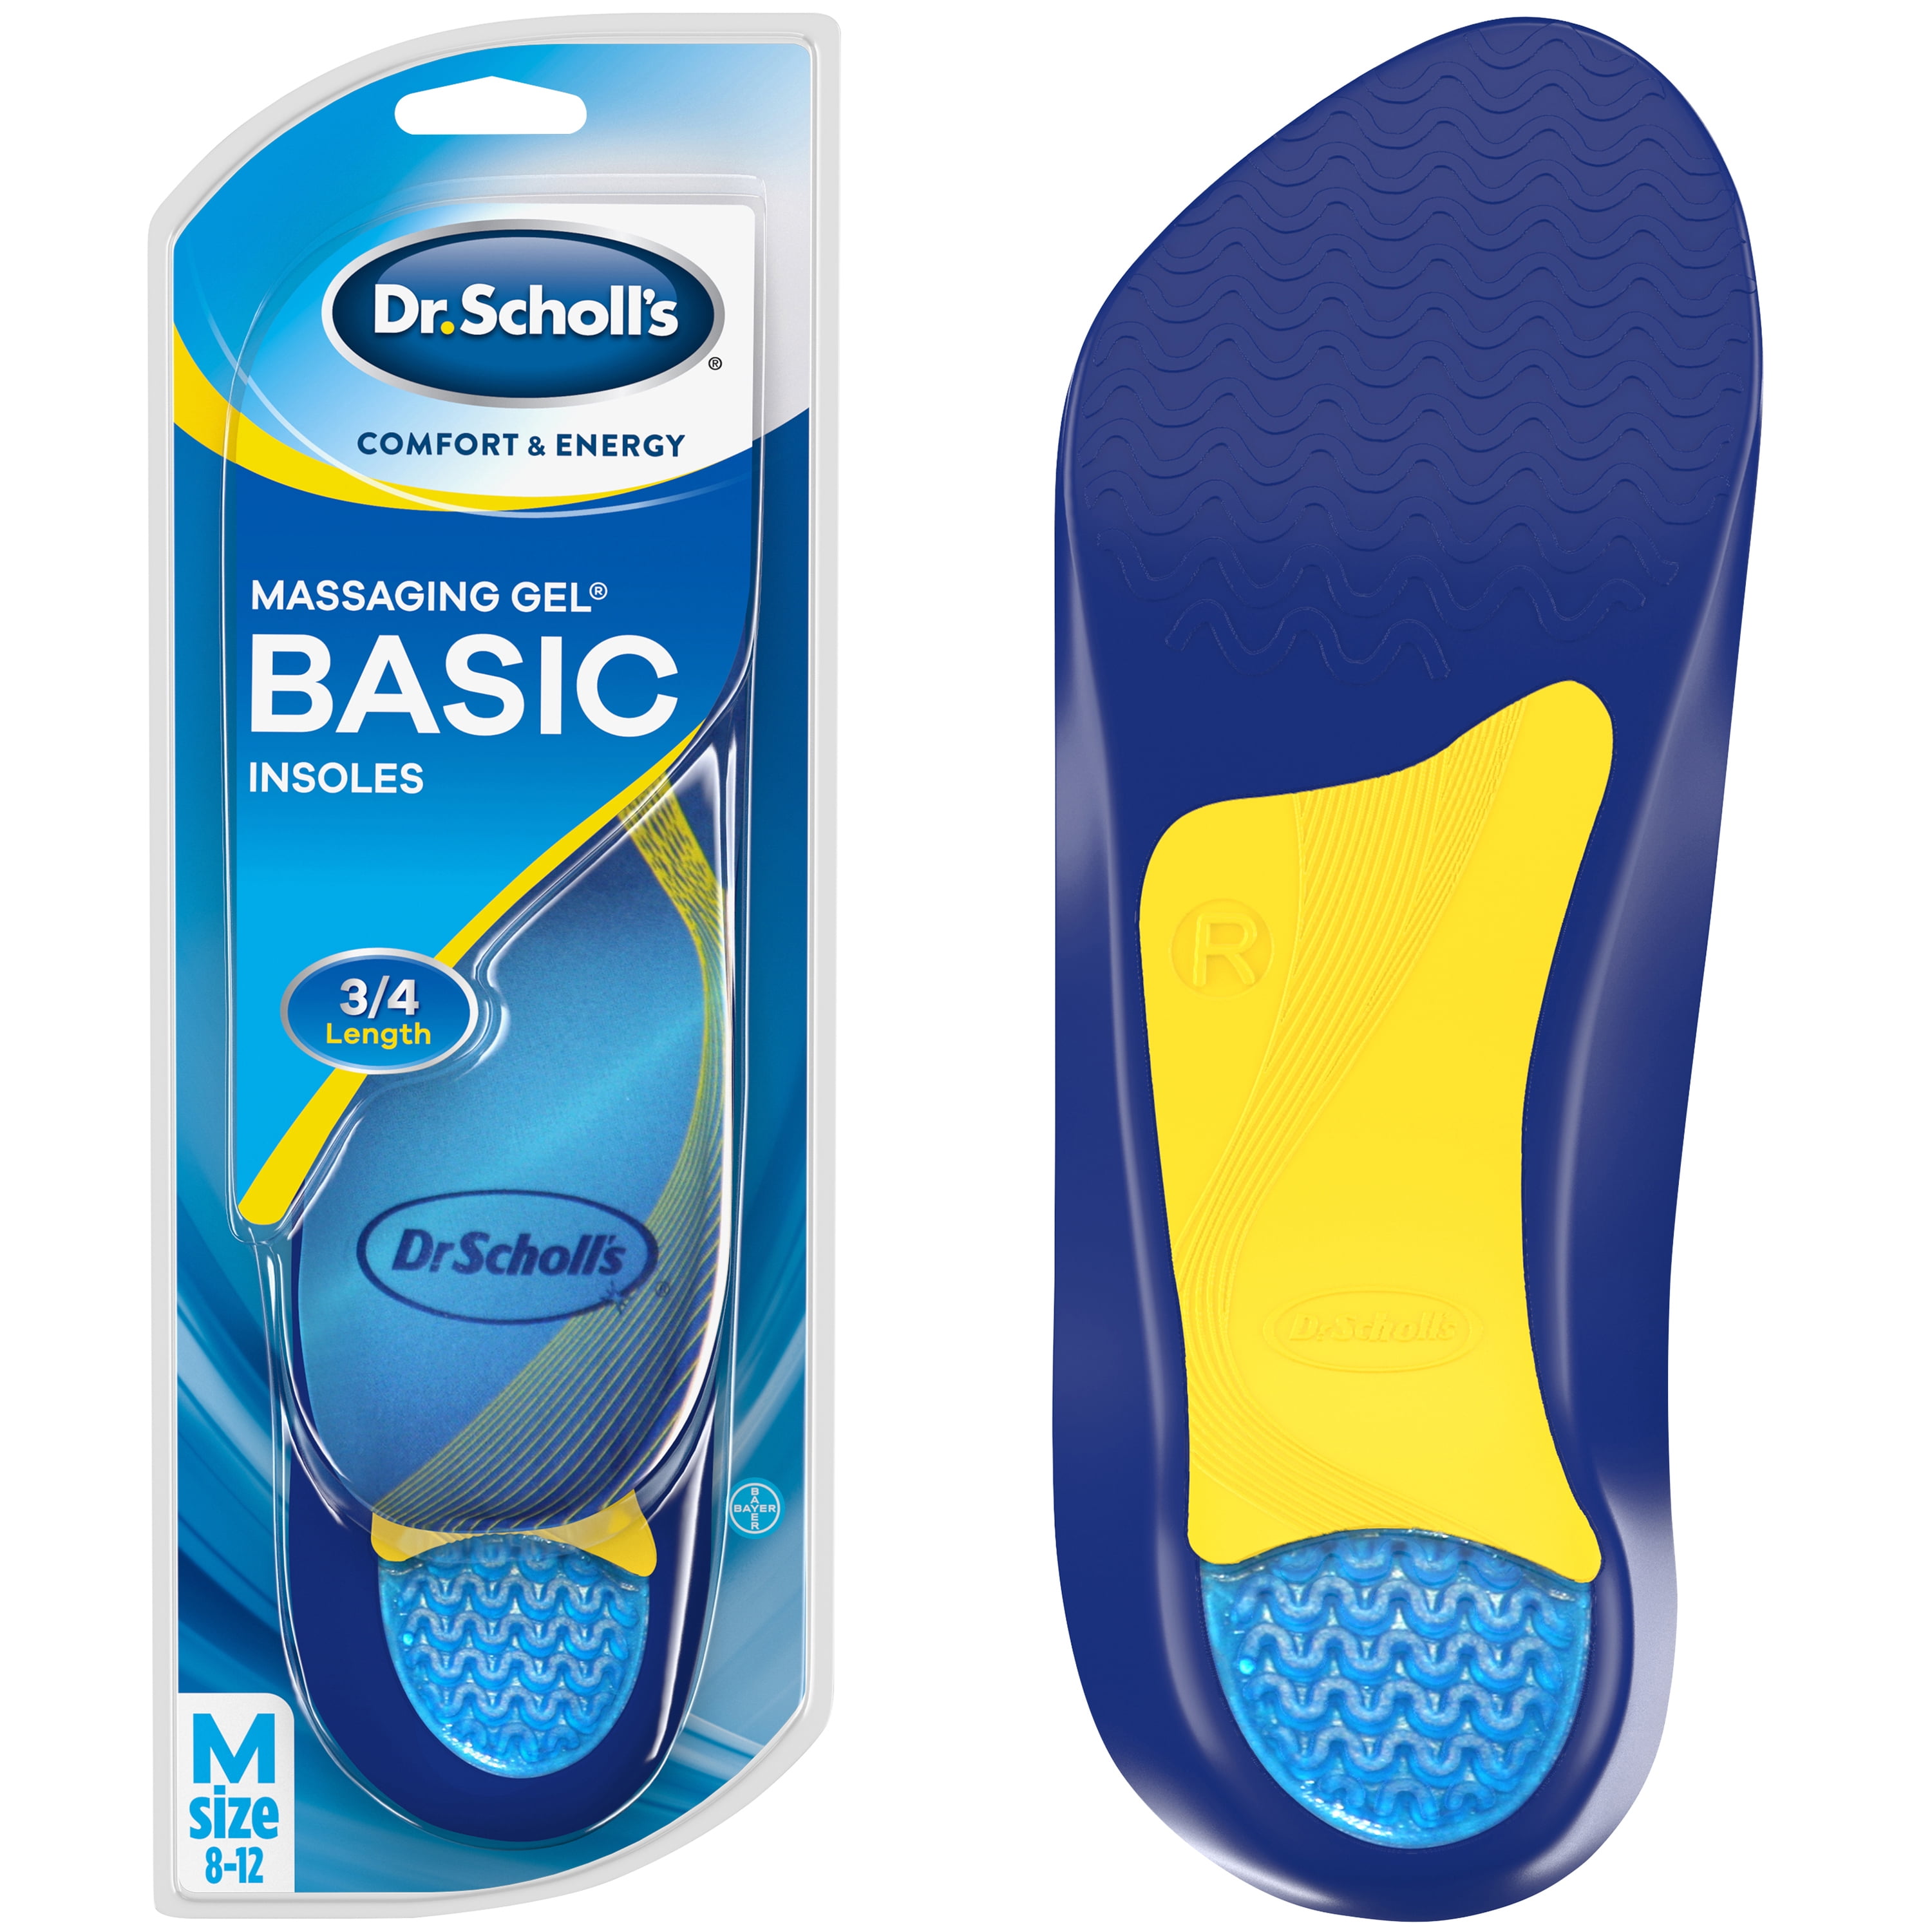 dr-scholl-s-massaging-gel-basic-insoles-for-men-8-12-inserts-with-3